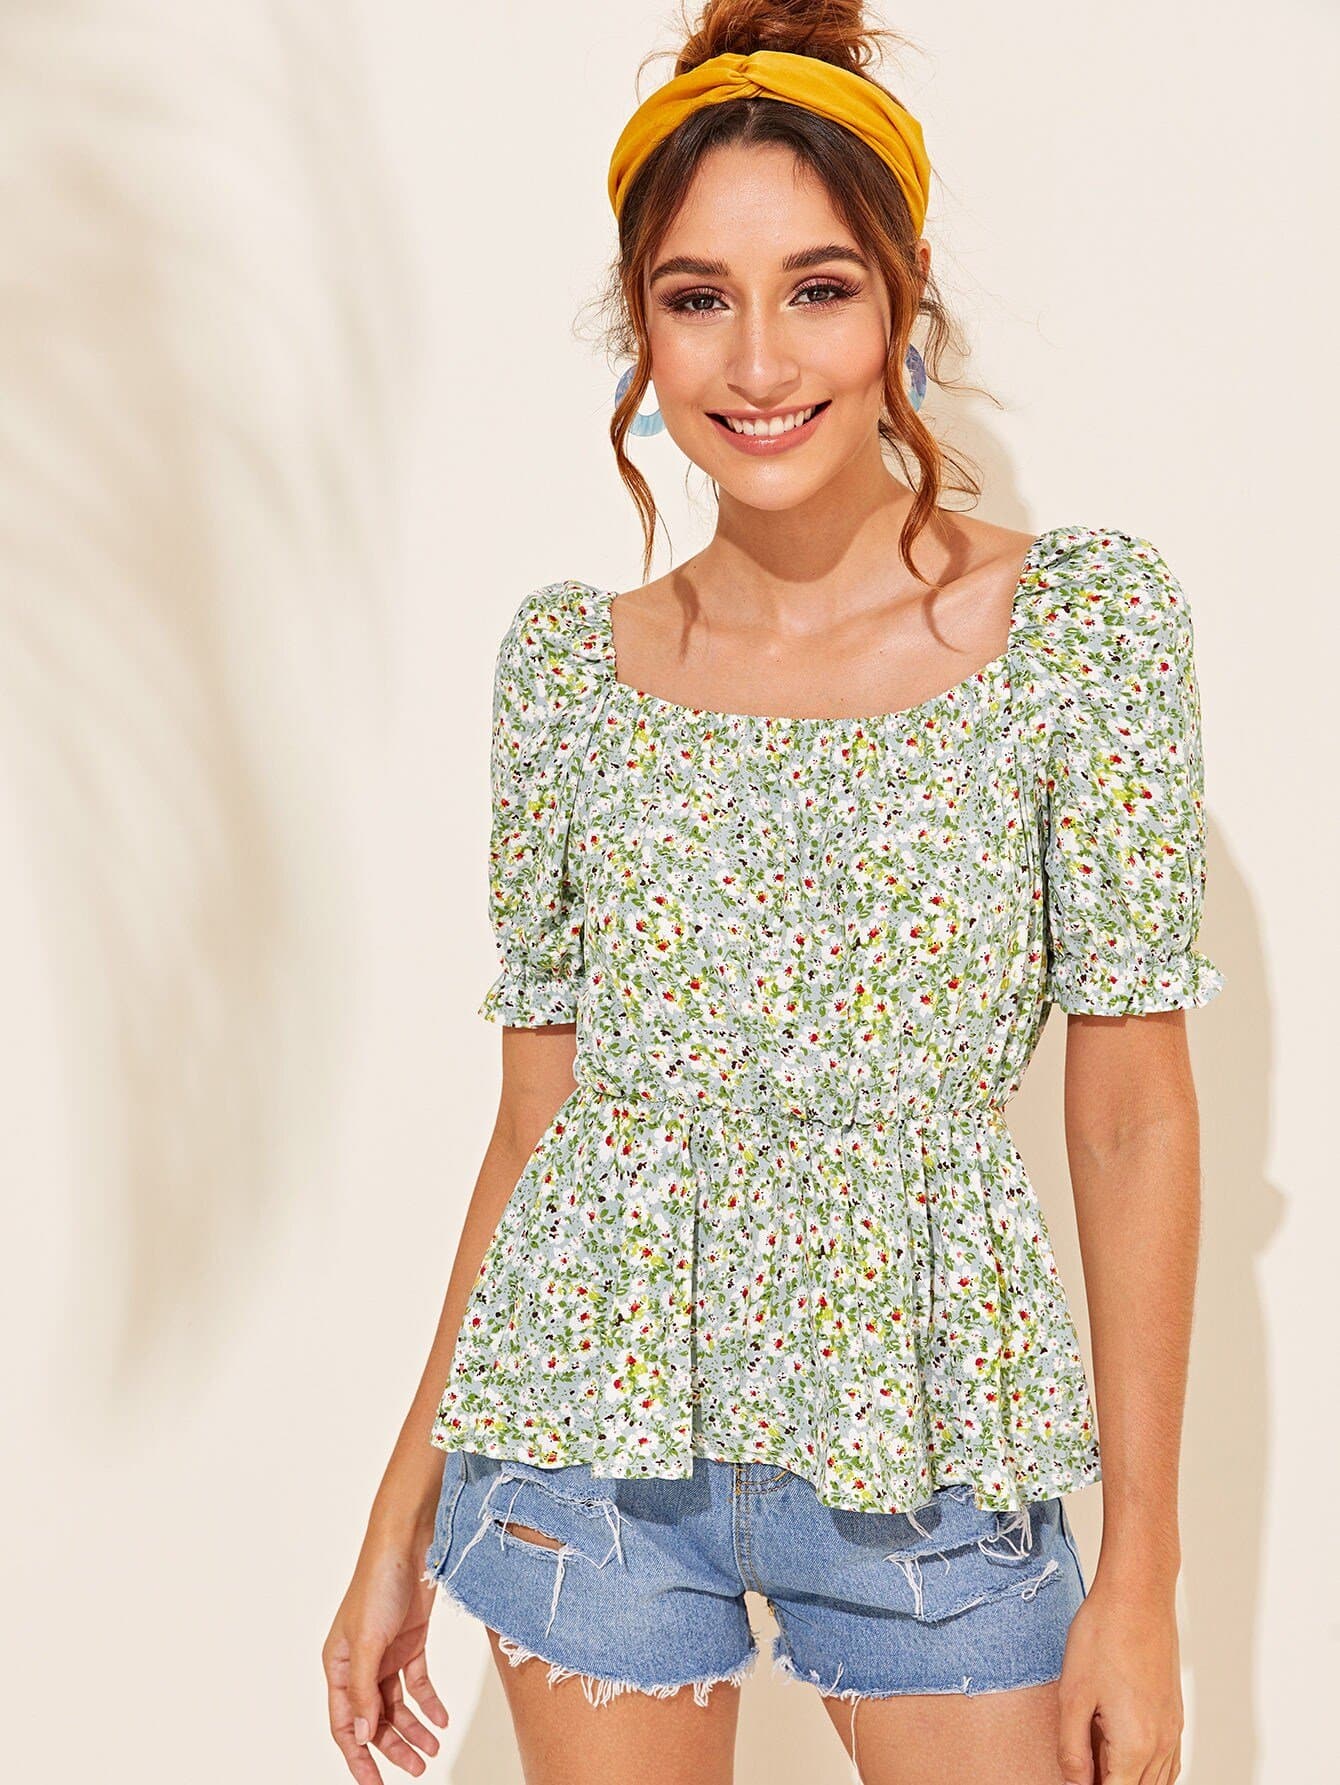 Square Neck Pastel Green Short Sleeve Ditsy Floral Square Neck Smock Top